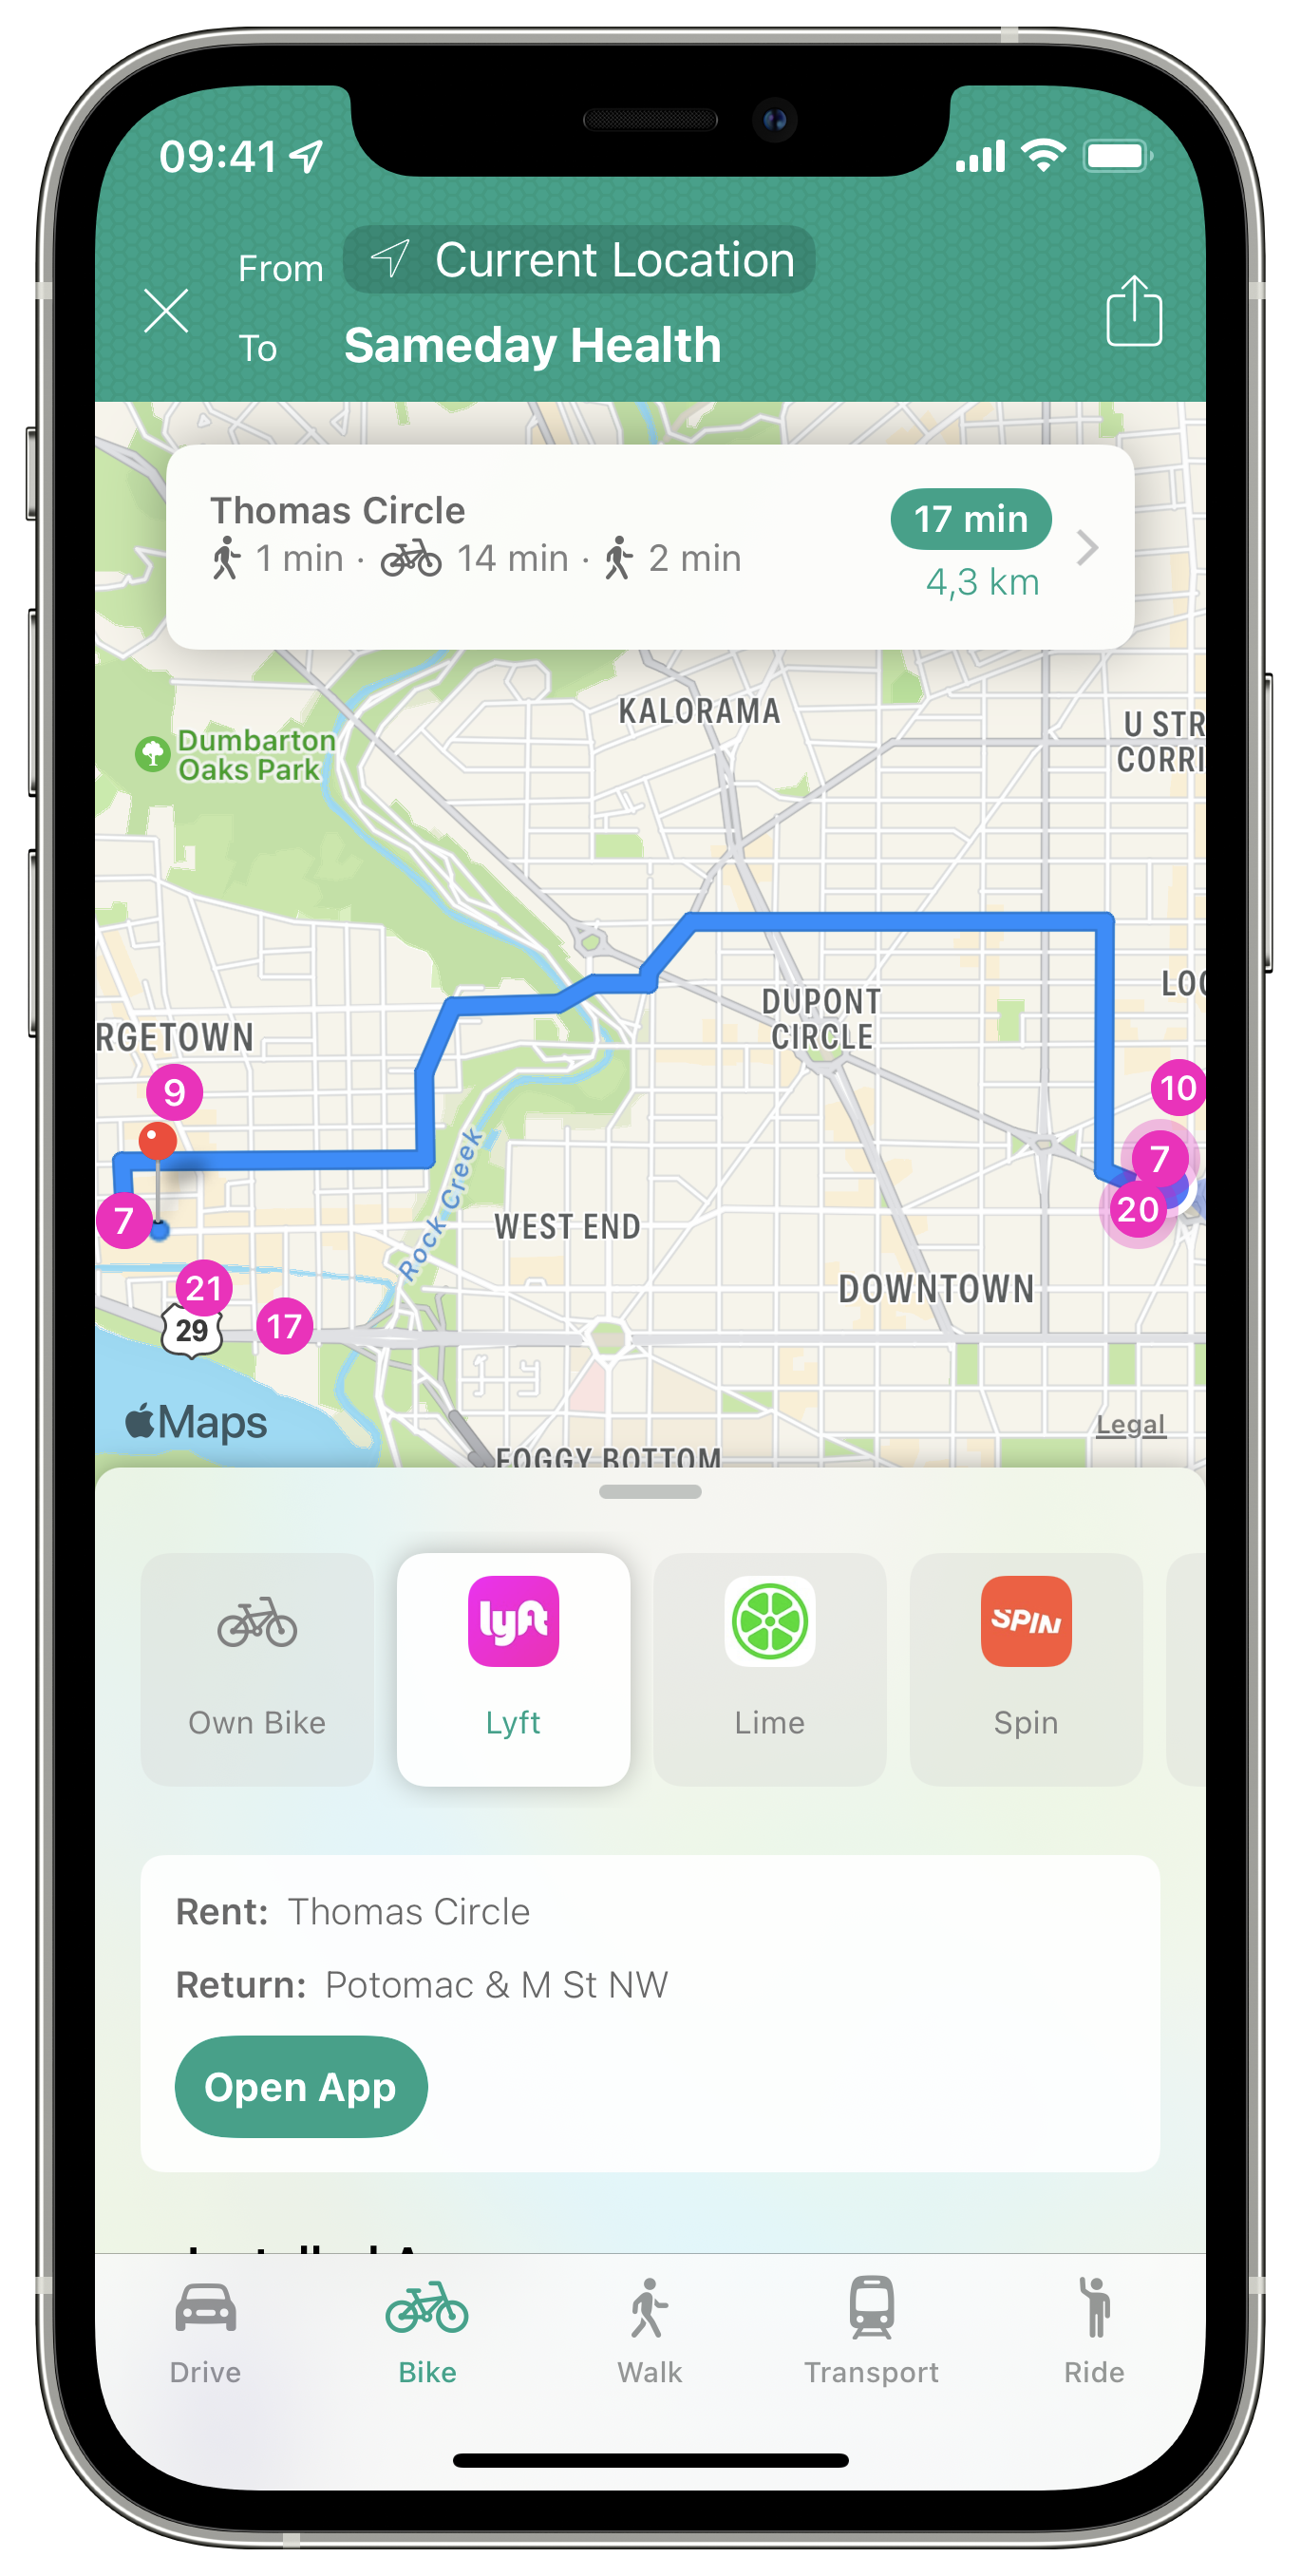 Where To? app adds micromobility services in major update